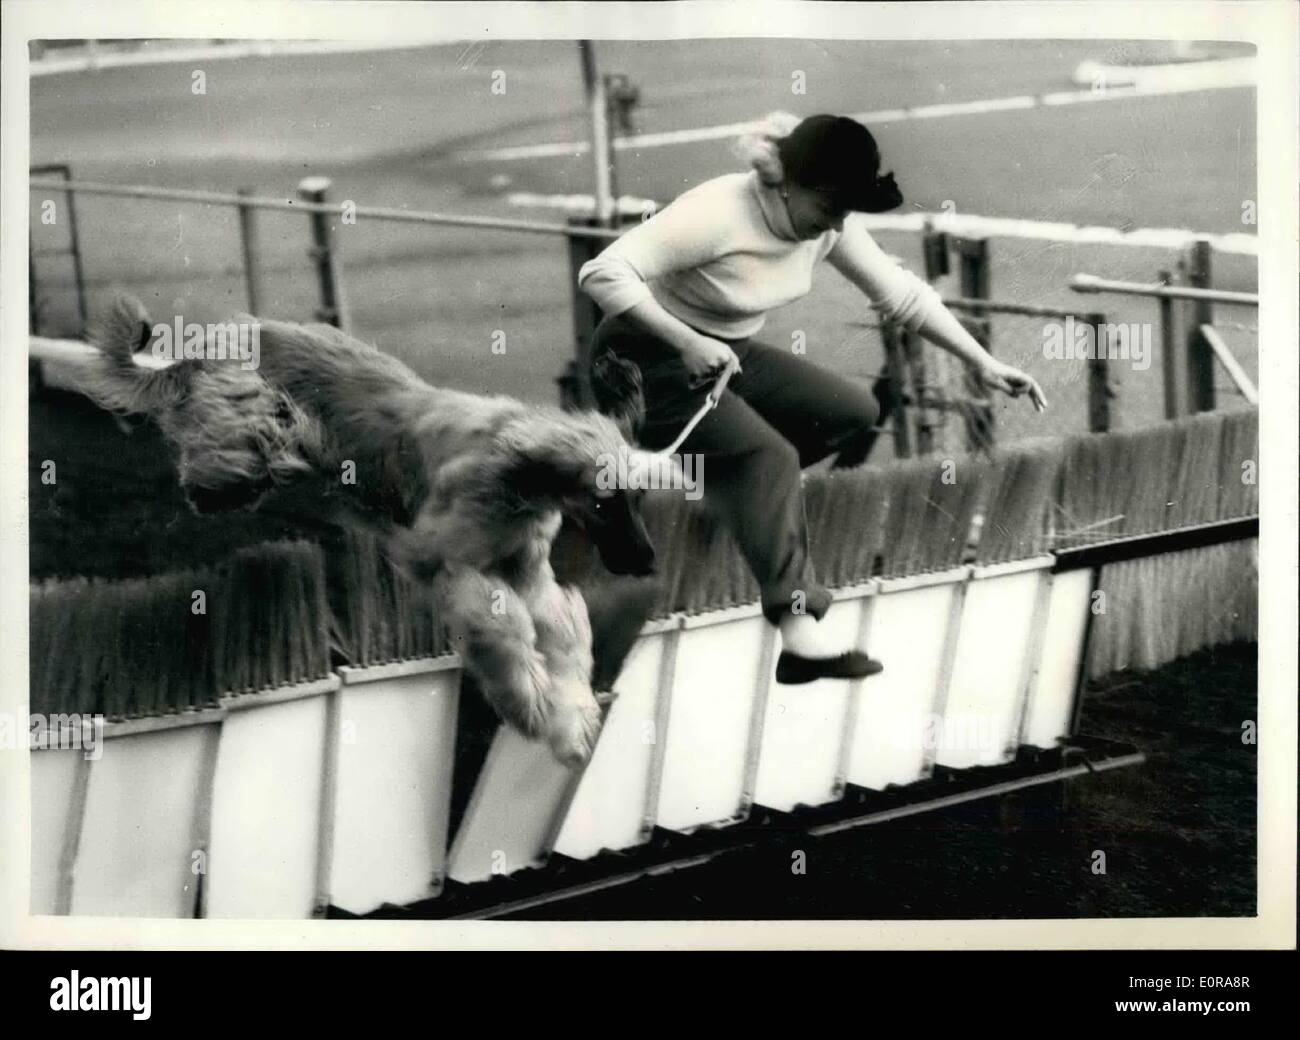 Nov. 11, 1958 - Afghan hounds trial at new Cross Stadium: Afghan Hounds owned by Mrs. Jean Briggs were to be seen being ''schooled'' at New Cross Stadium this morning behind the electric hare. Mrs. Briggs has been given permission to train the dogs at New Cross although there is no possibility of them racing against greyhounds or competing in a Greyhound meeting. They could later chase the dummy hare - and may evening be used in a ''Cavalcade of speed'' display as they are still in the ''Kindergarten'' stage. Photo shows Mrs Stock Photo